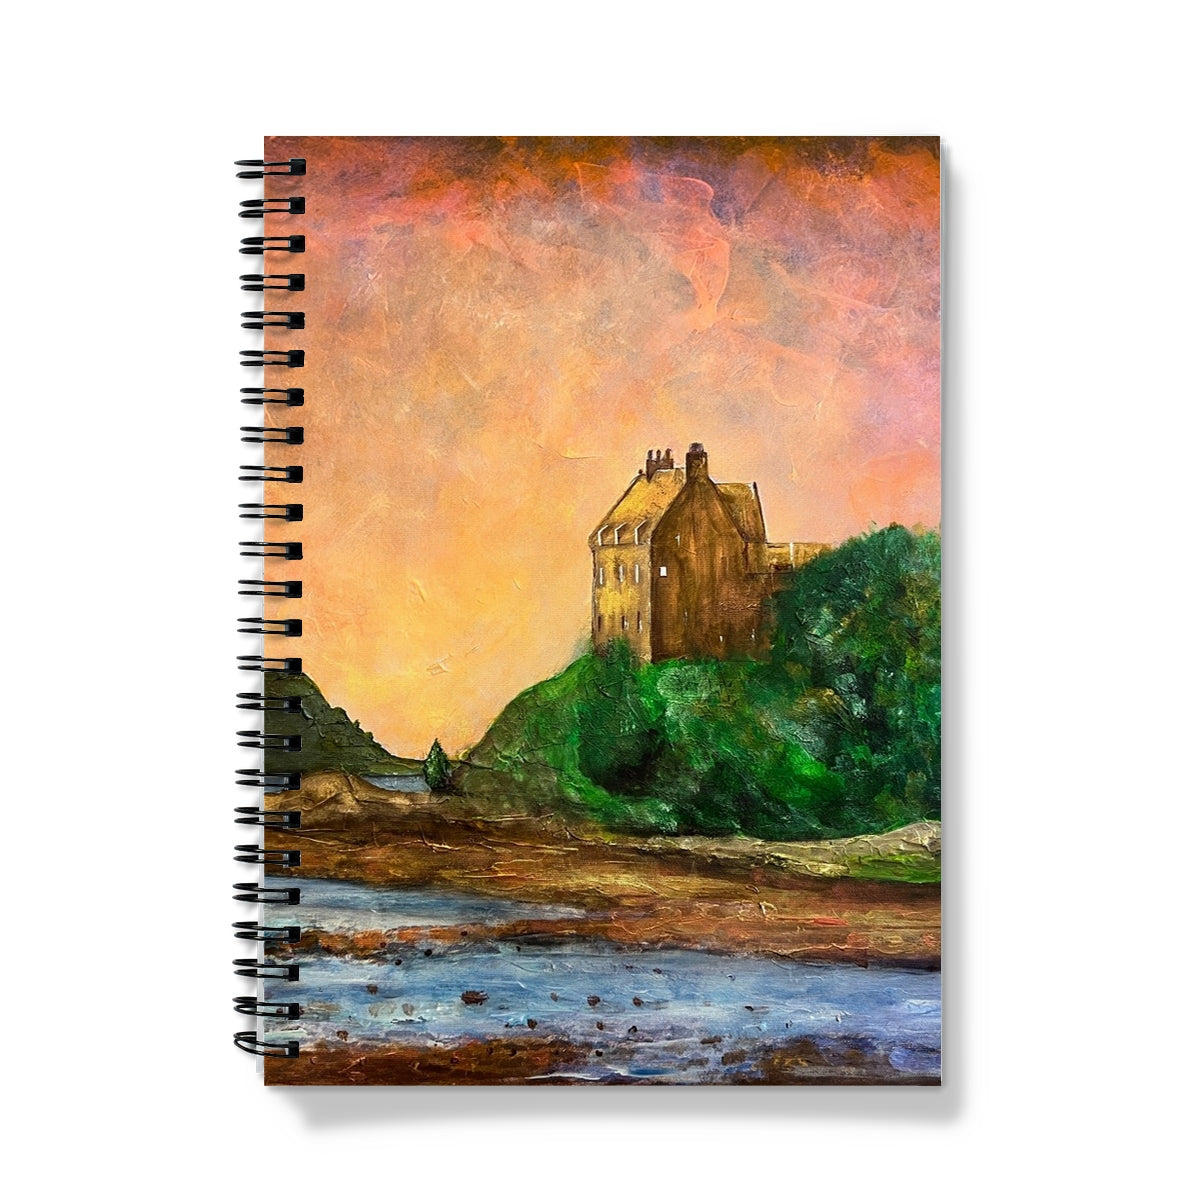 Duntrune Castle Art Gifts Notebook-Journals & Notebooks-Historic & Iconic Scotland Art Gallery-A4-Graph-Paintings, Prints, Homeware, Art Gifts From Scotland By Scottish Artist Kevin Hunter